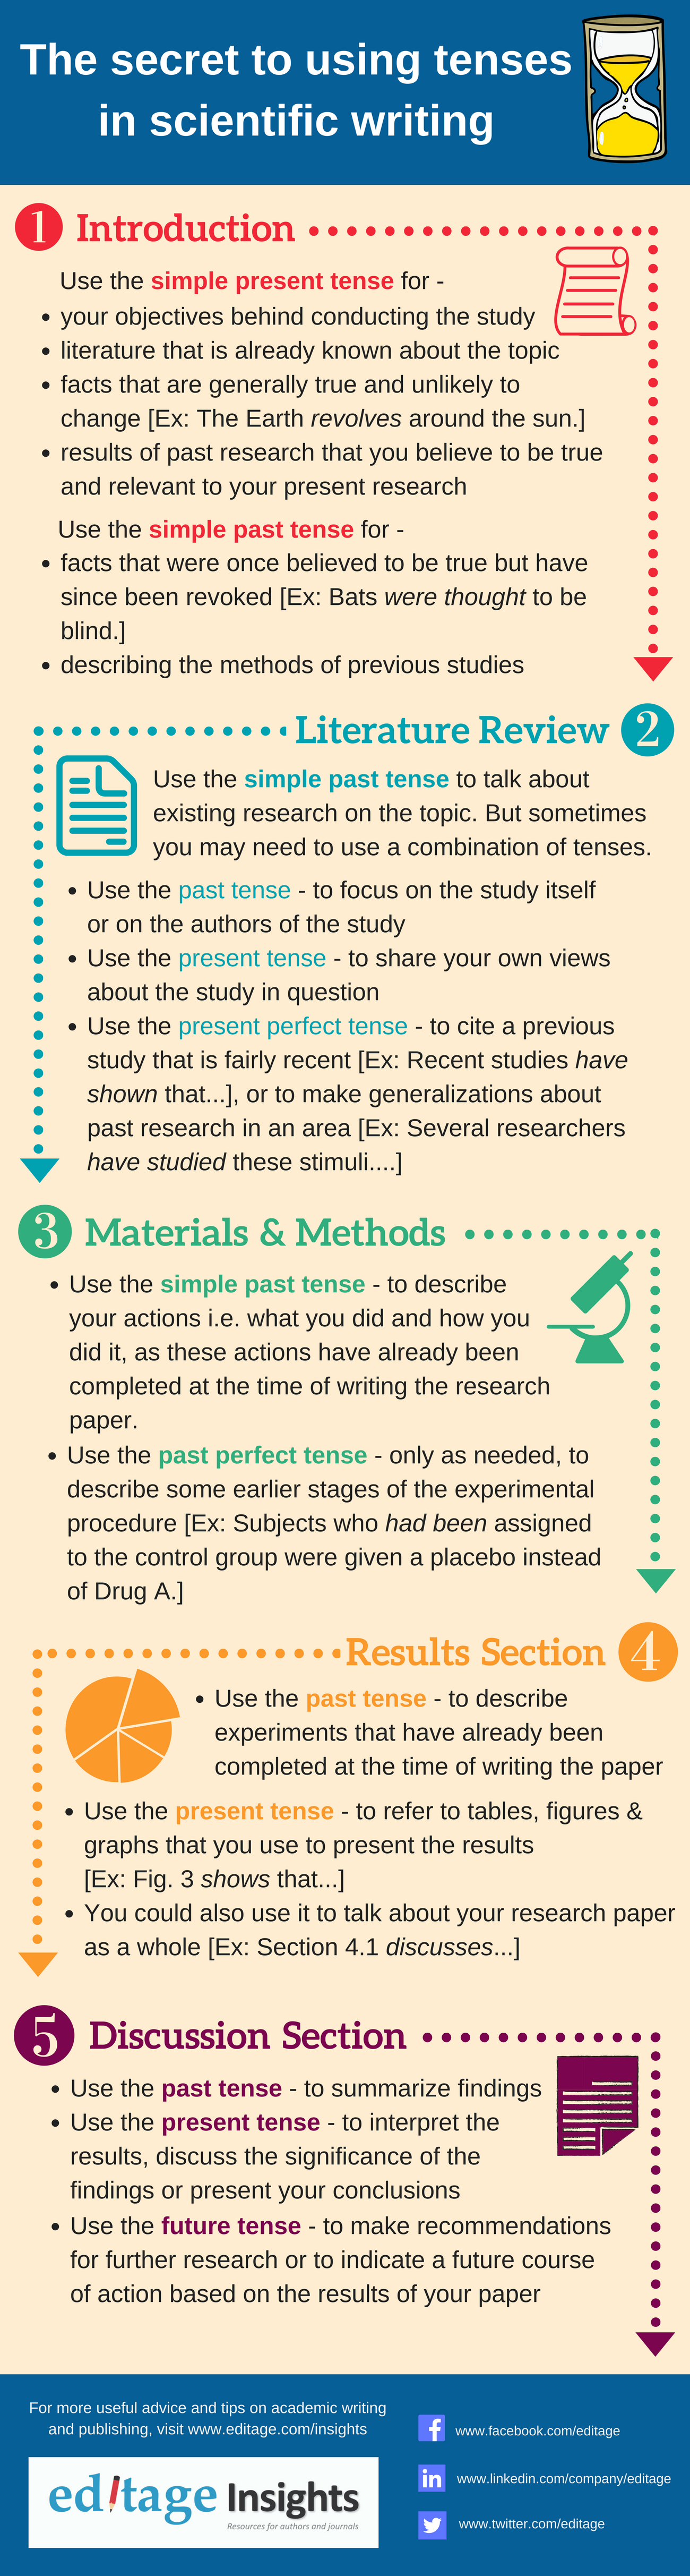 research paper past or present tense